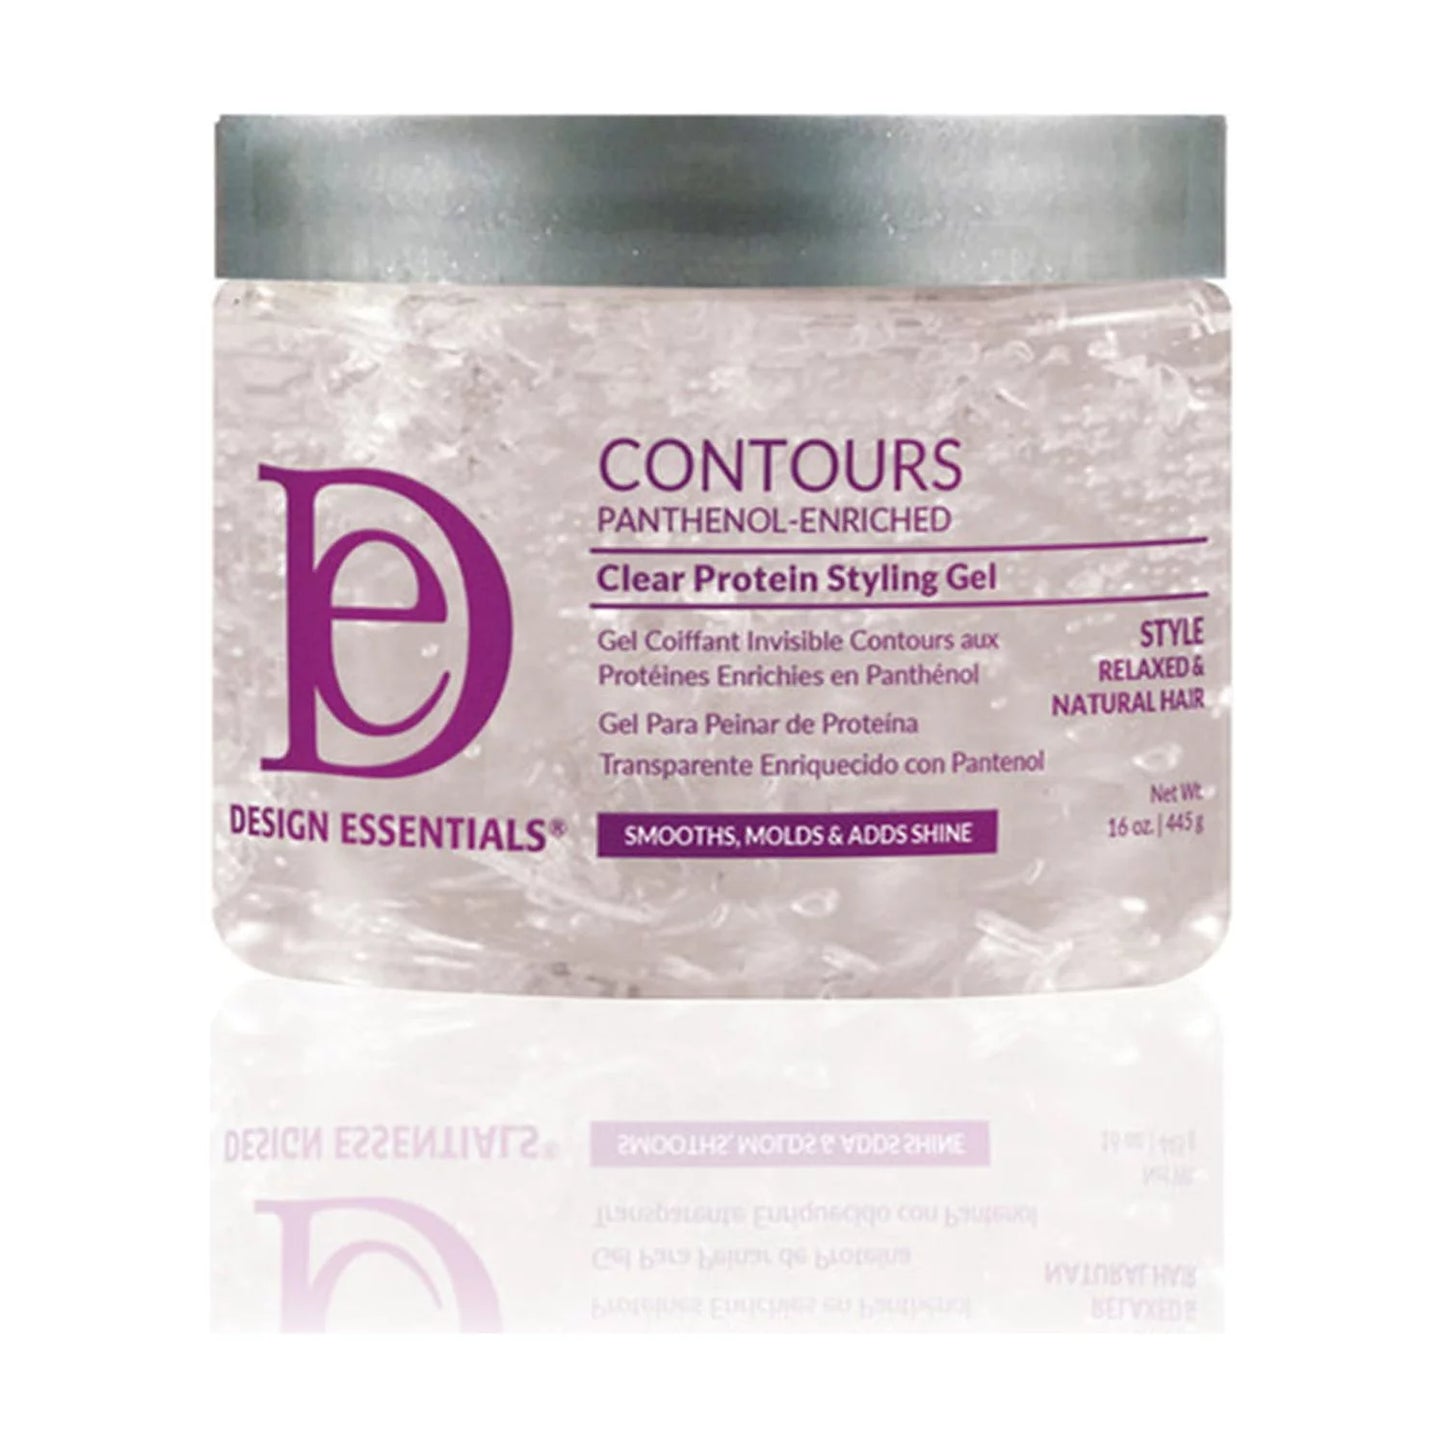 Contours Panthenol Enriched Clear Protein Styling Gel